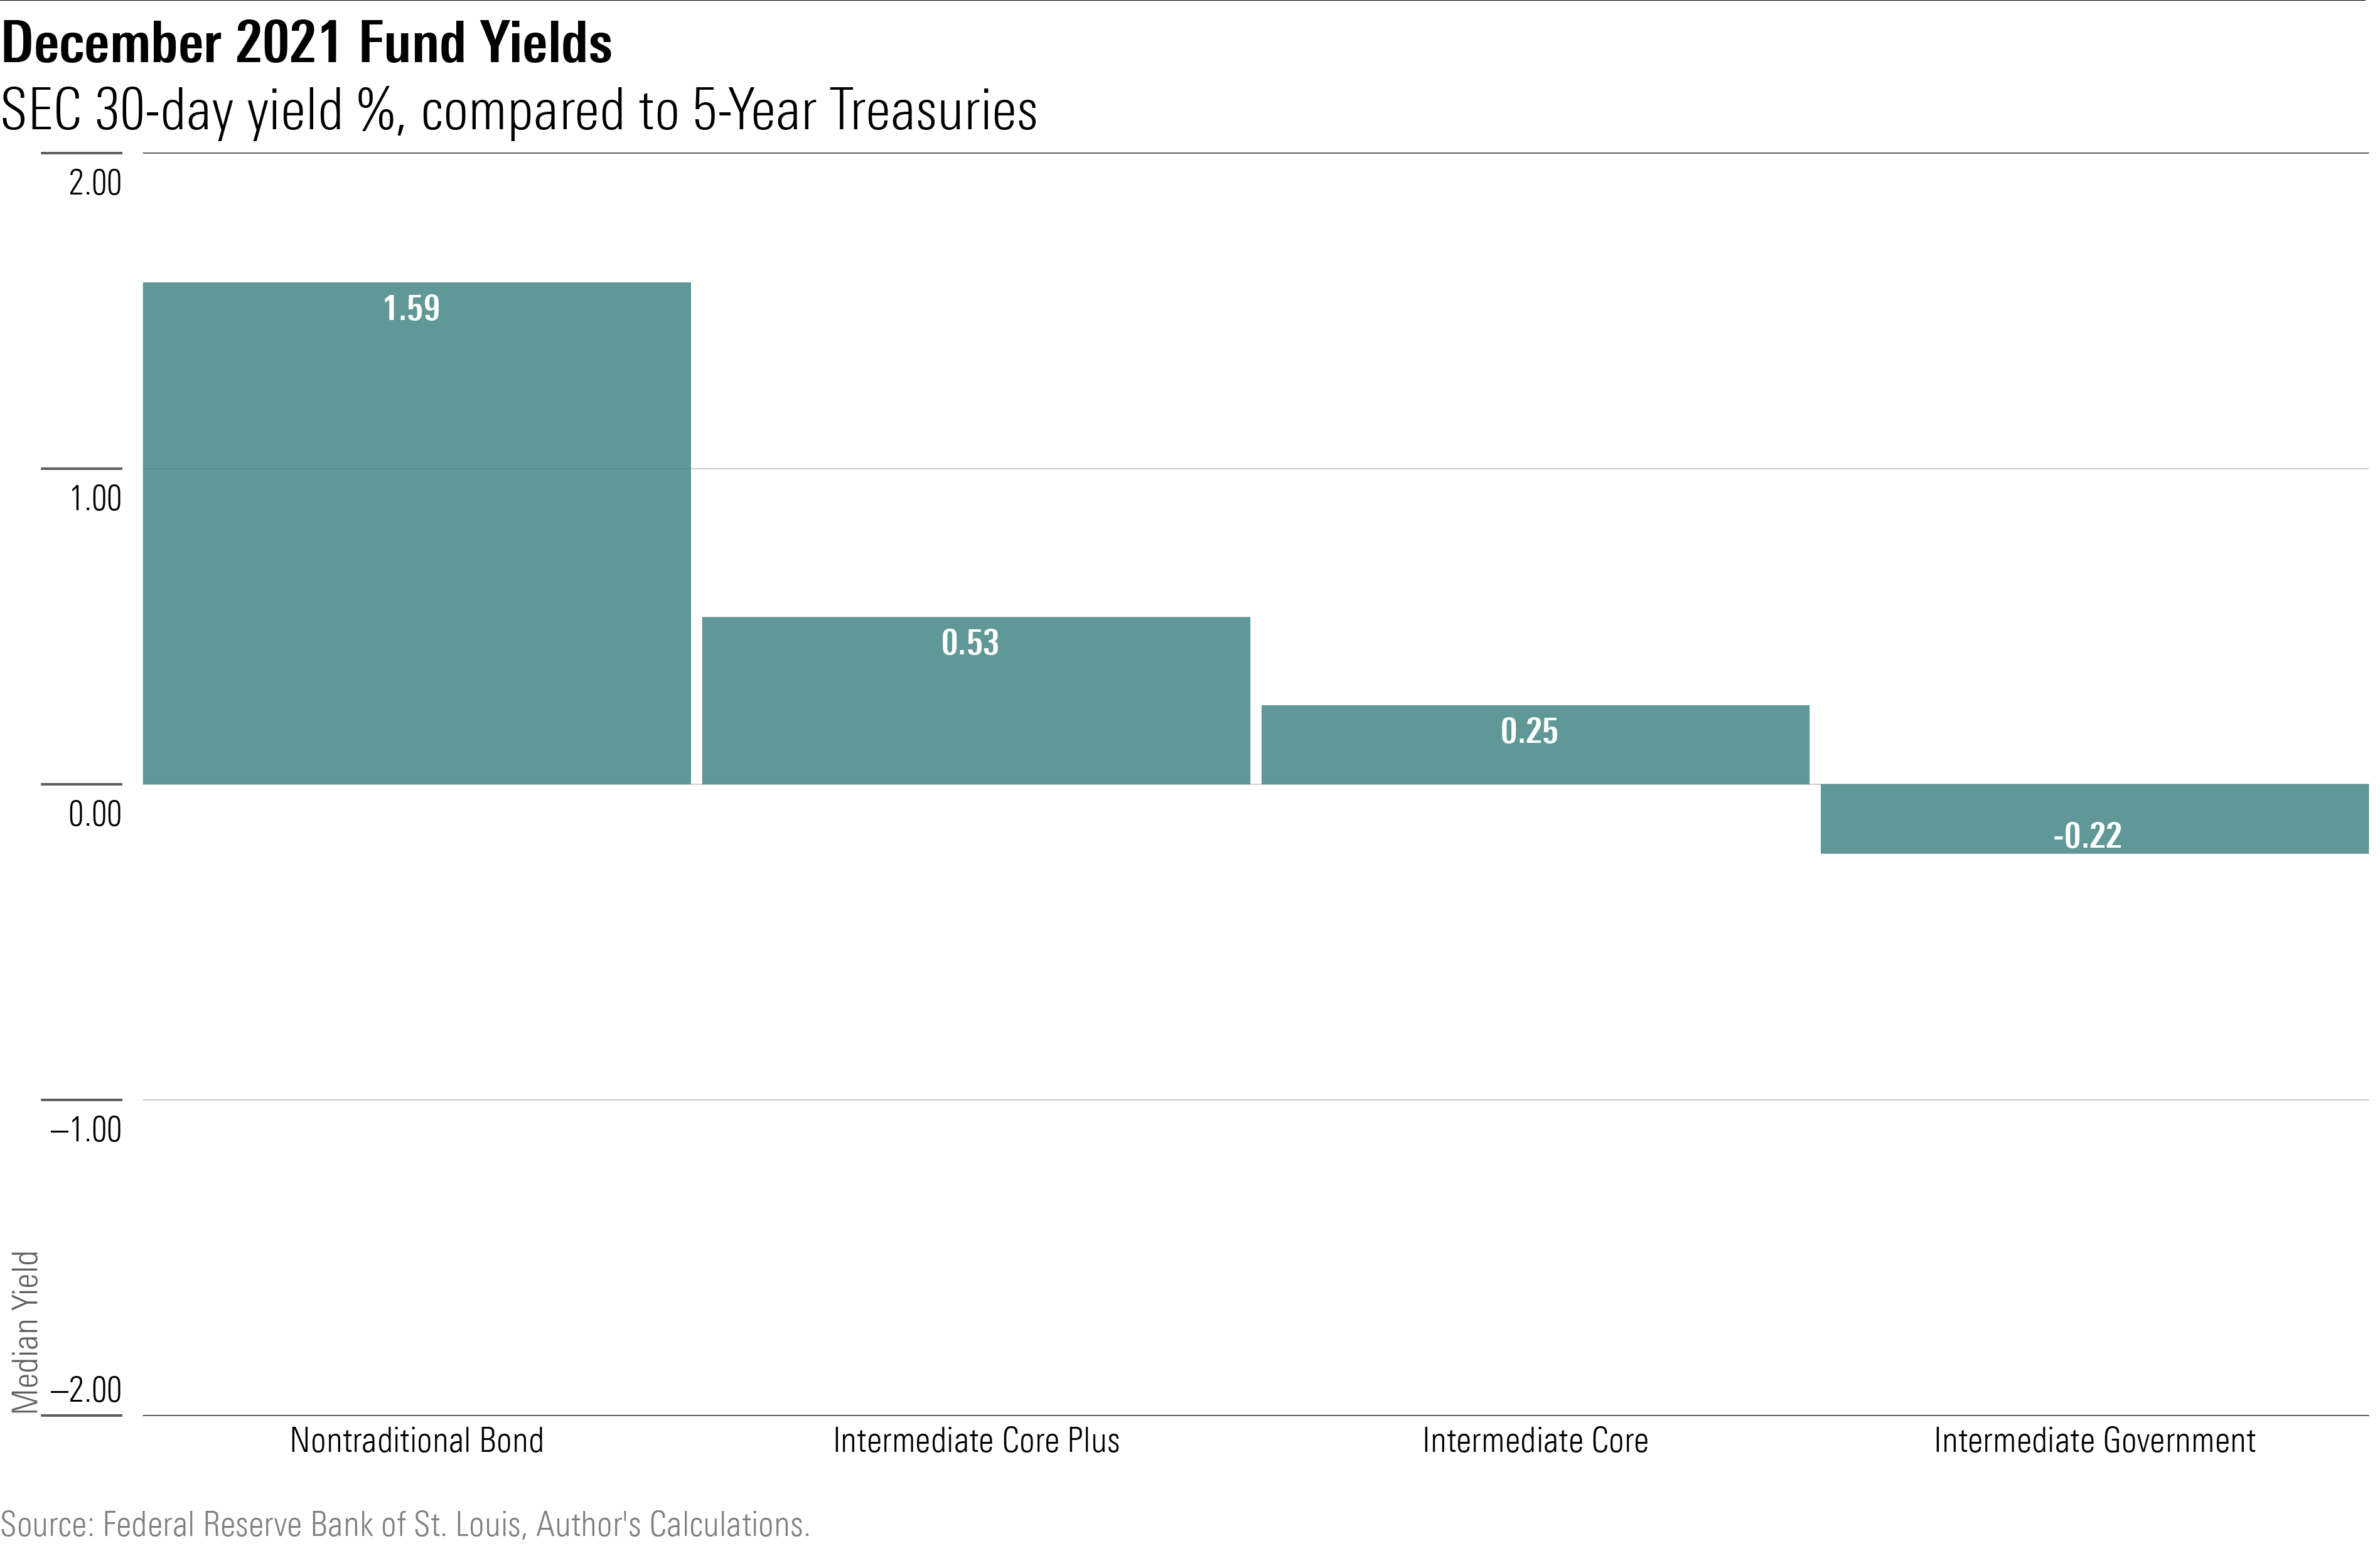 A bar chart showing the 30-day SEC yields for four bond-fund cattegories, as of 12/31/21, when compared to the yield as of that date for 5-year Treasury notes.